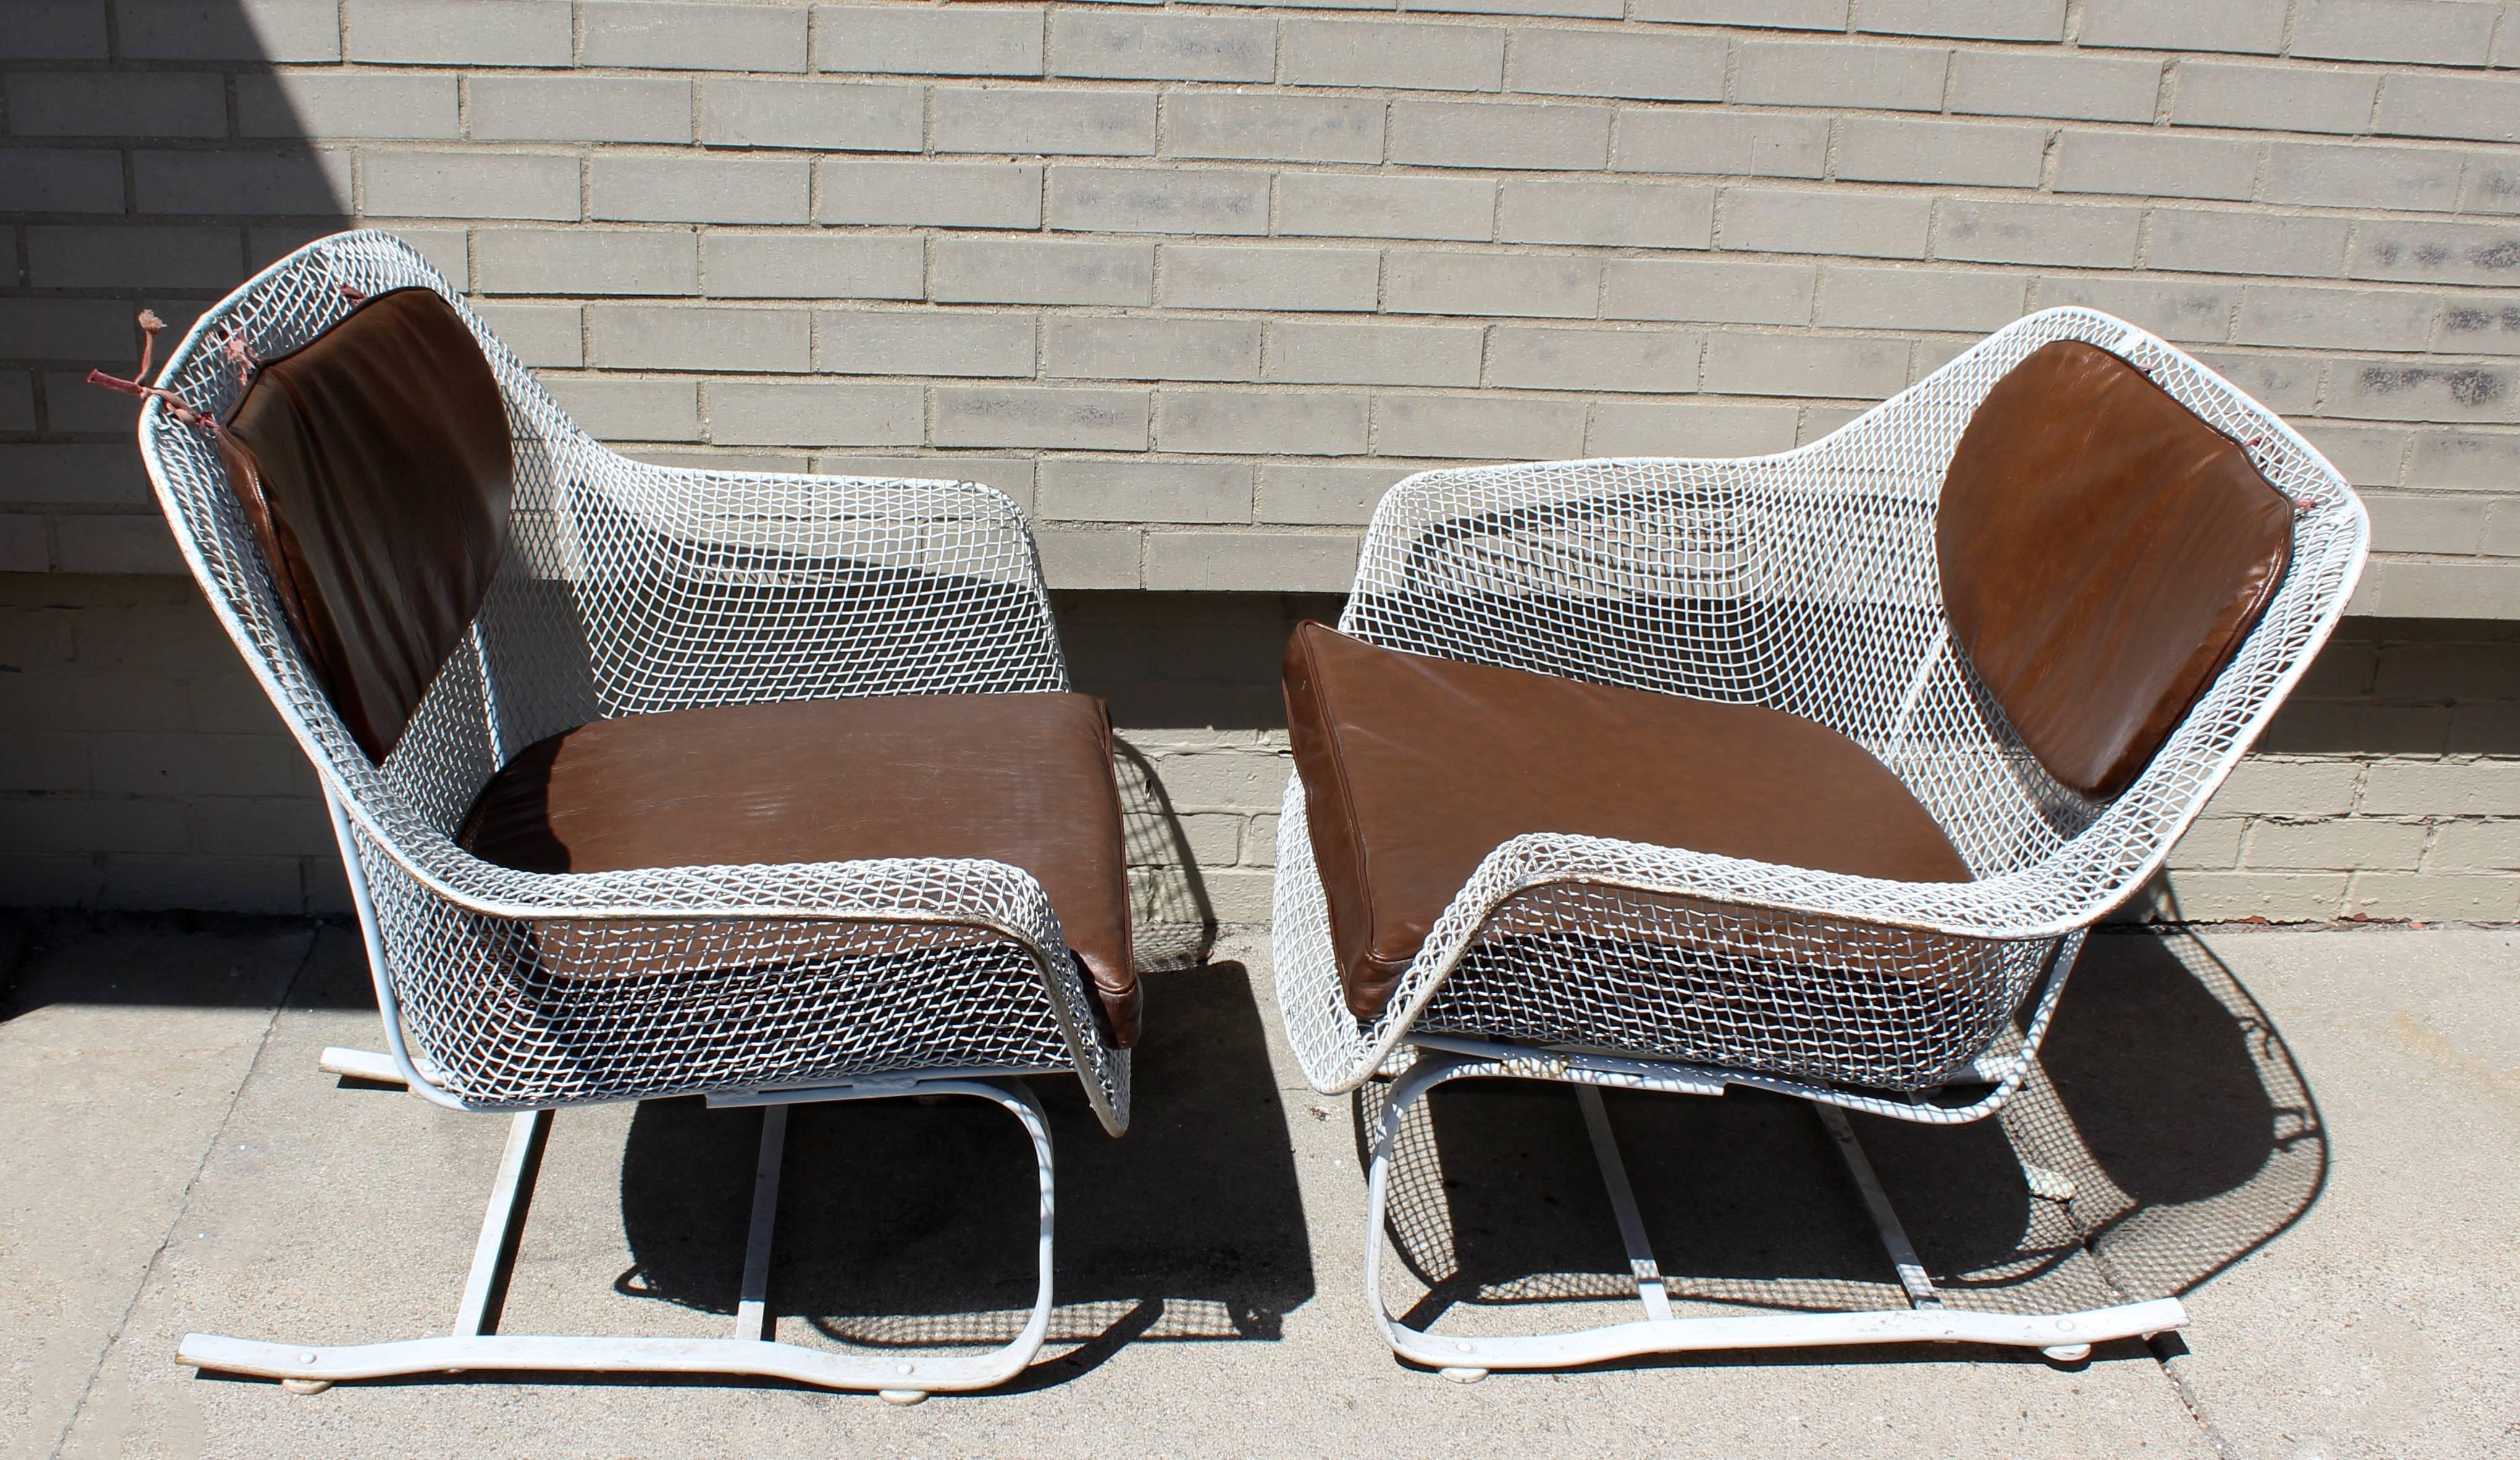 For your consideration is an amazing, white painted wrought iron, outdoor patio set by Woodard Sculptura, circa the 1950s. This large set includes a sofa, settee, pair of rockers, pair of armchairs and dinette set; and all come with their original,